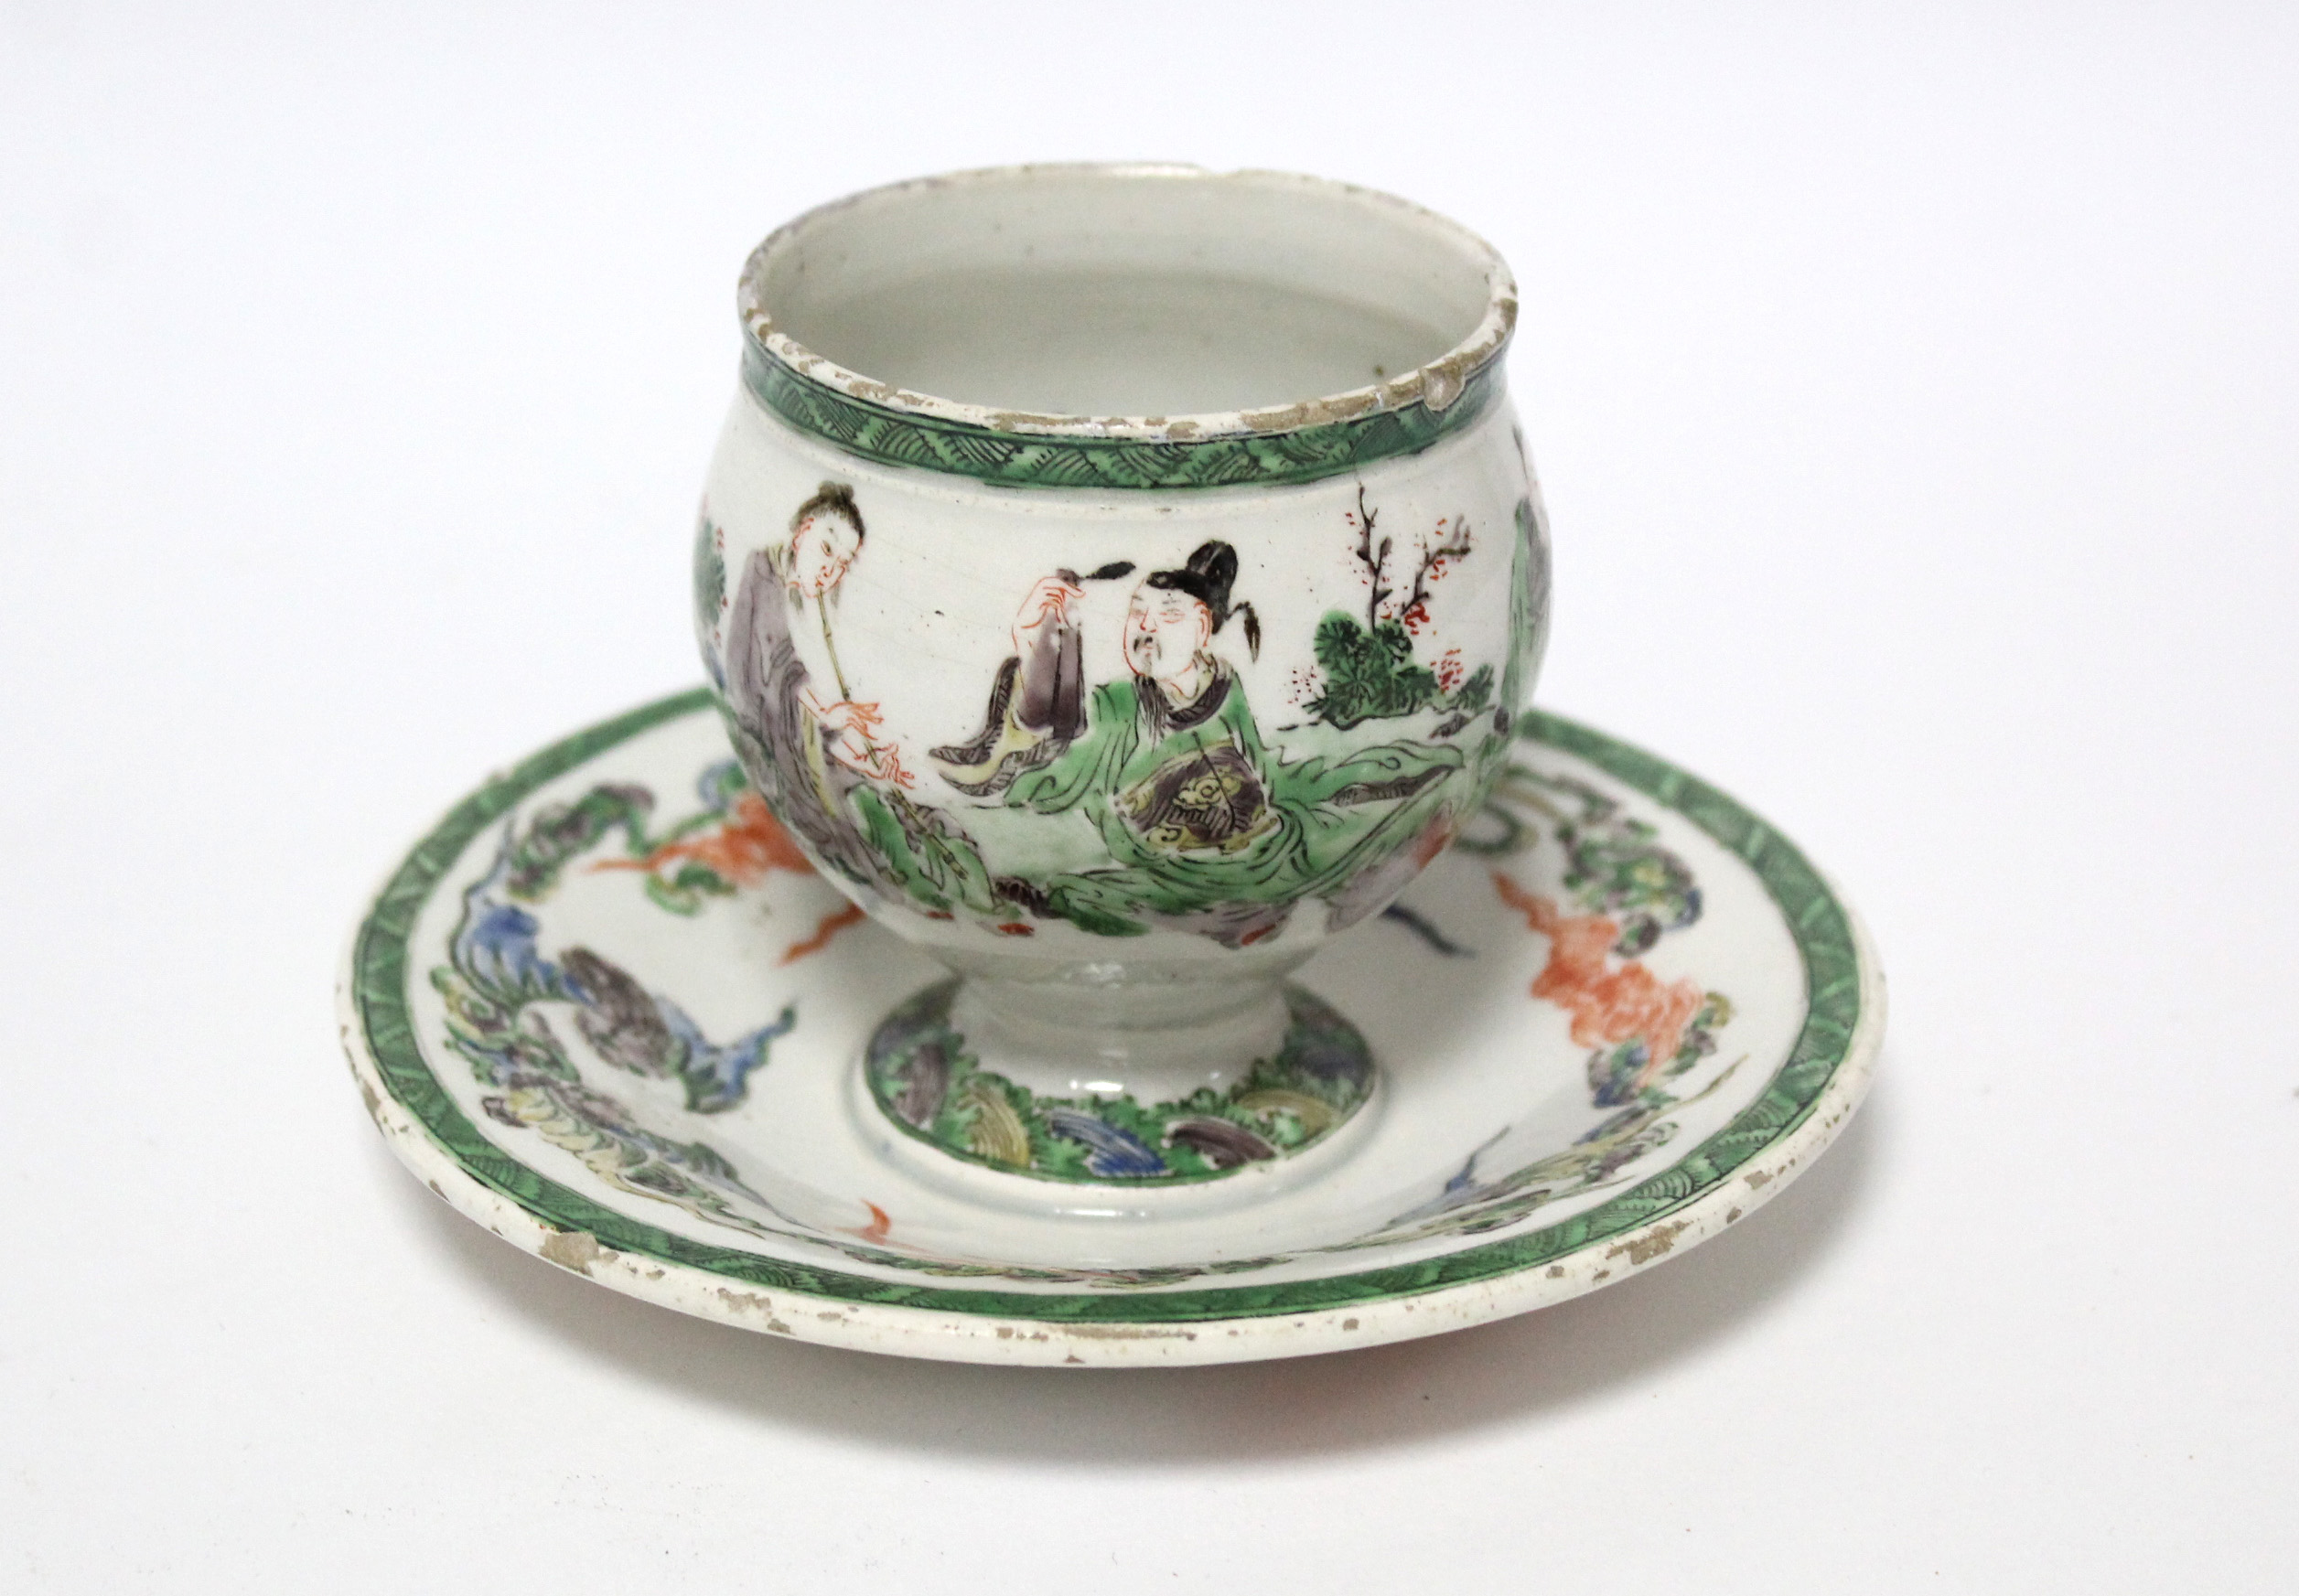 An 18th century English earthenware small round cup on circular integral stand, with finely